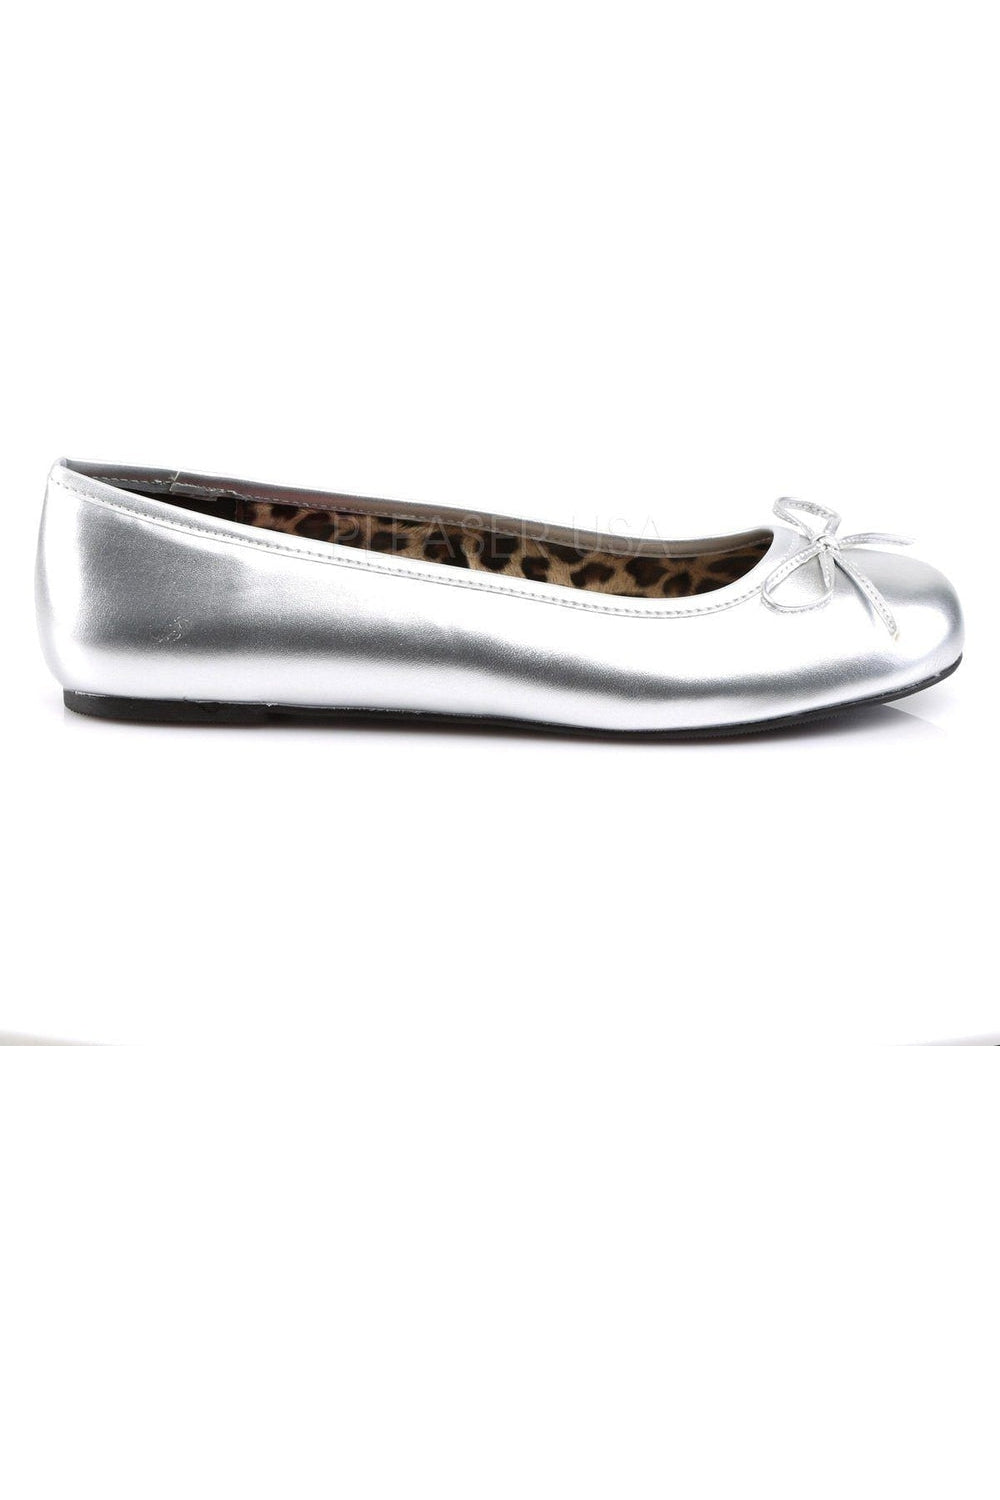 ANNA-01 Flat | Silver Faux Leather-Pleaser Pink Label-Flats-SEXYSHOES.COM